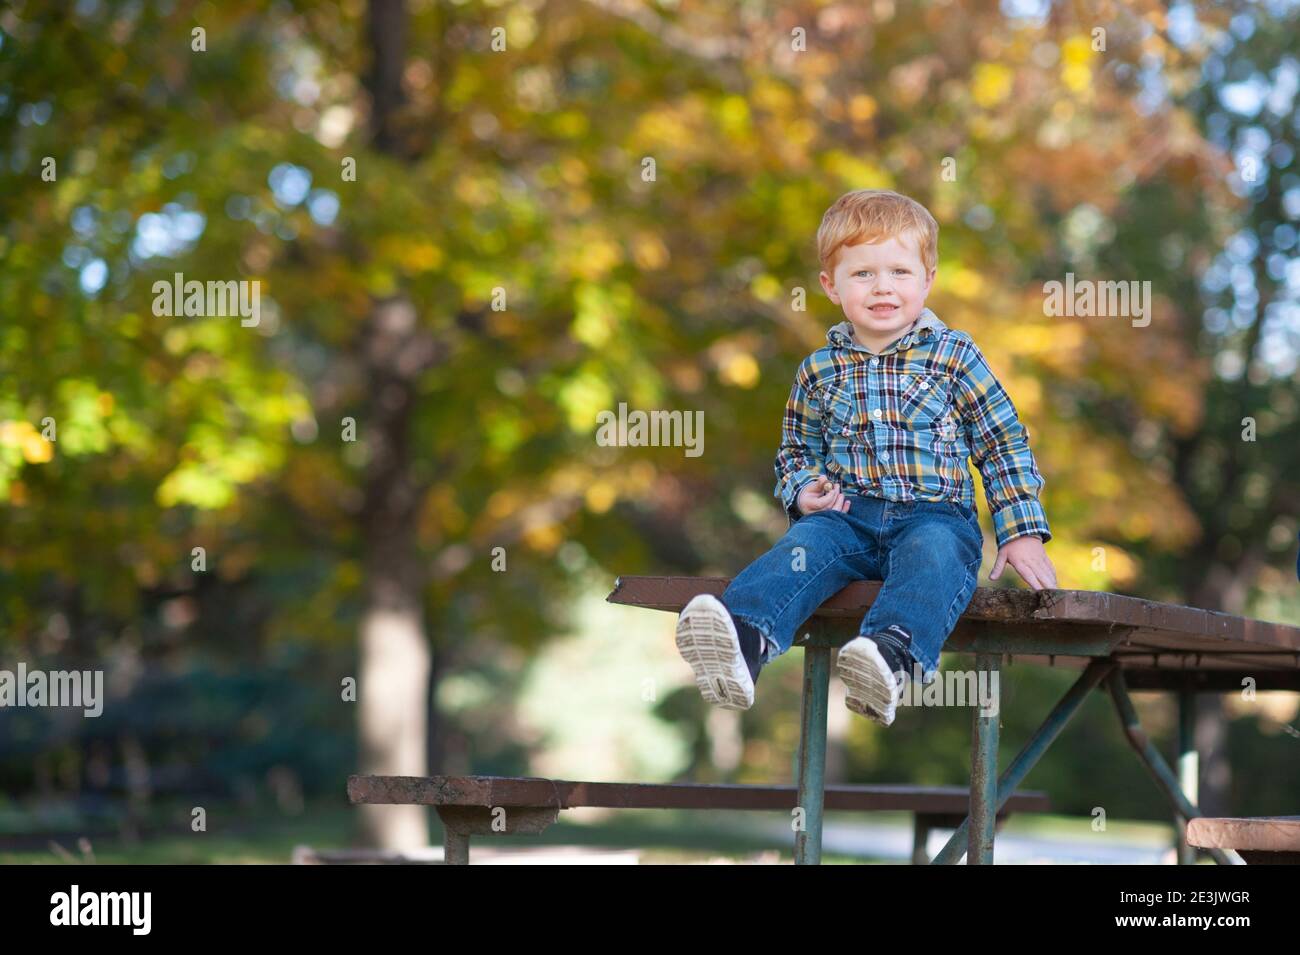 Toddler boy 3 to 4 years old sitting on edge of picnic table smiling Stock Photo